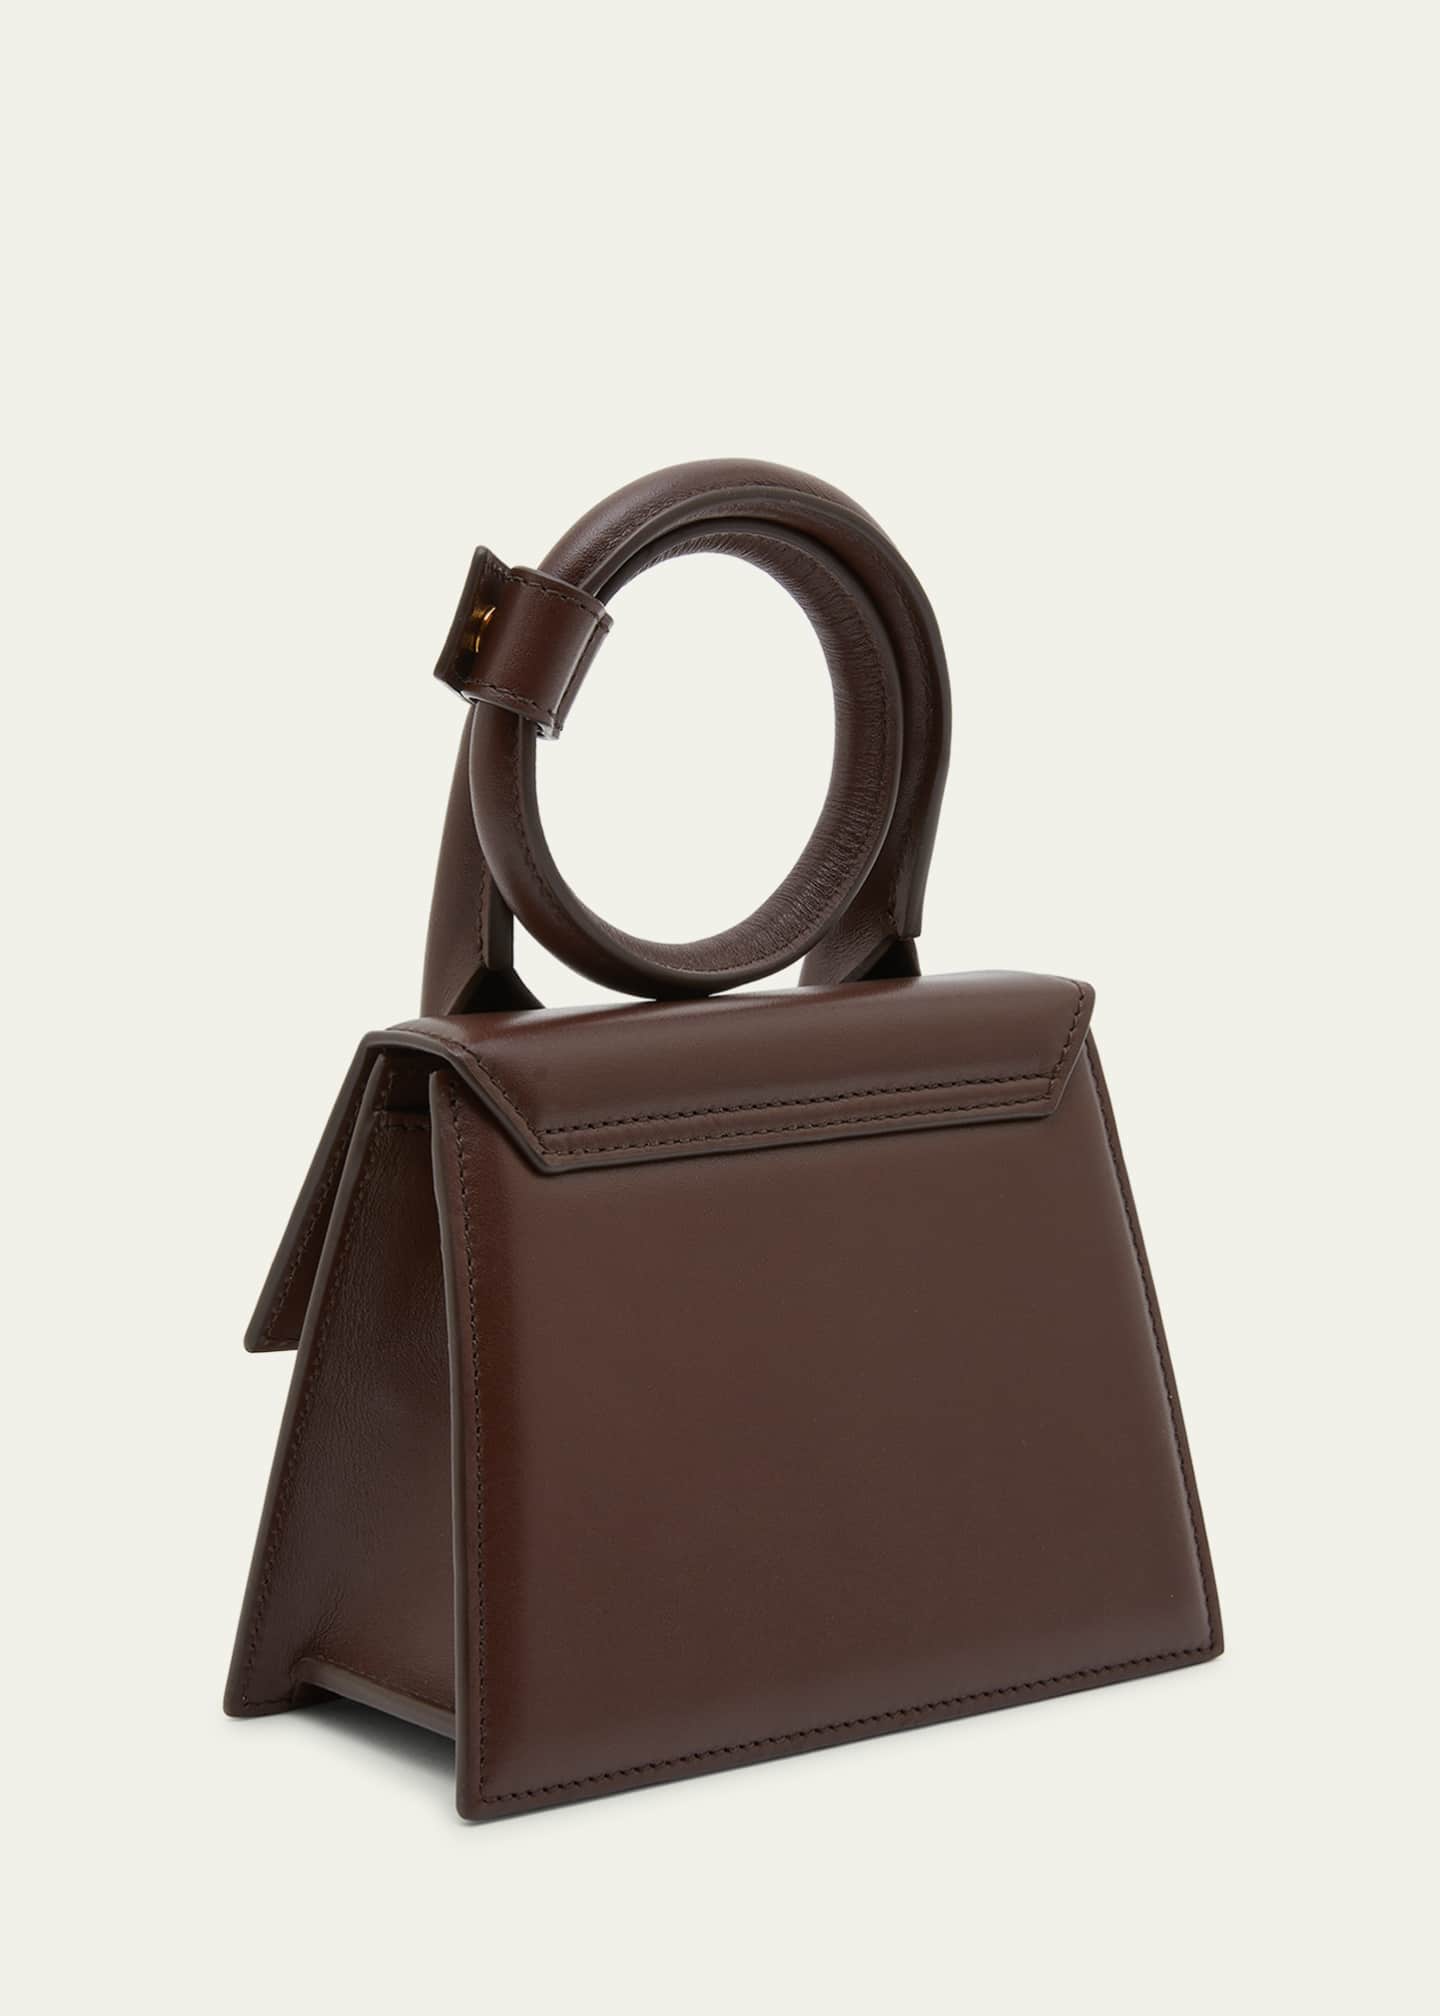 Jacquemus Le Chiquito Y Brown Mini Bag in Gold Hardware